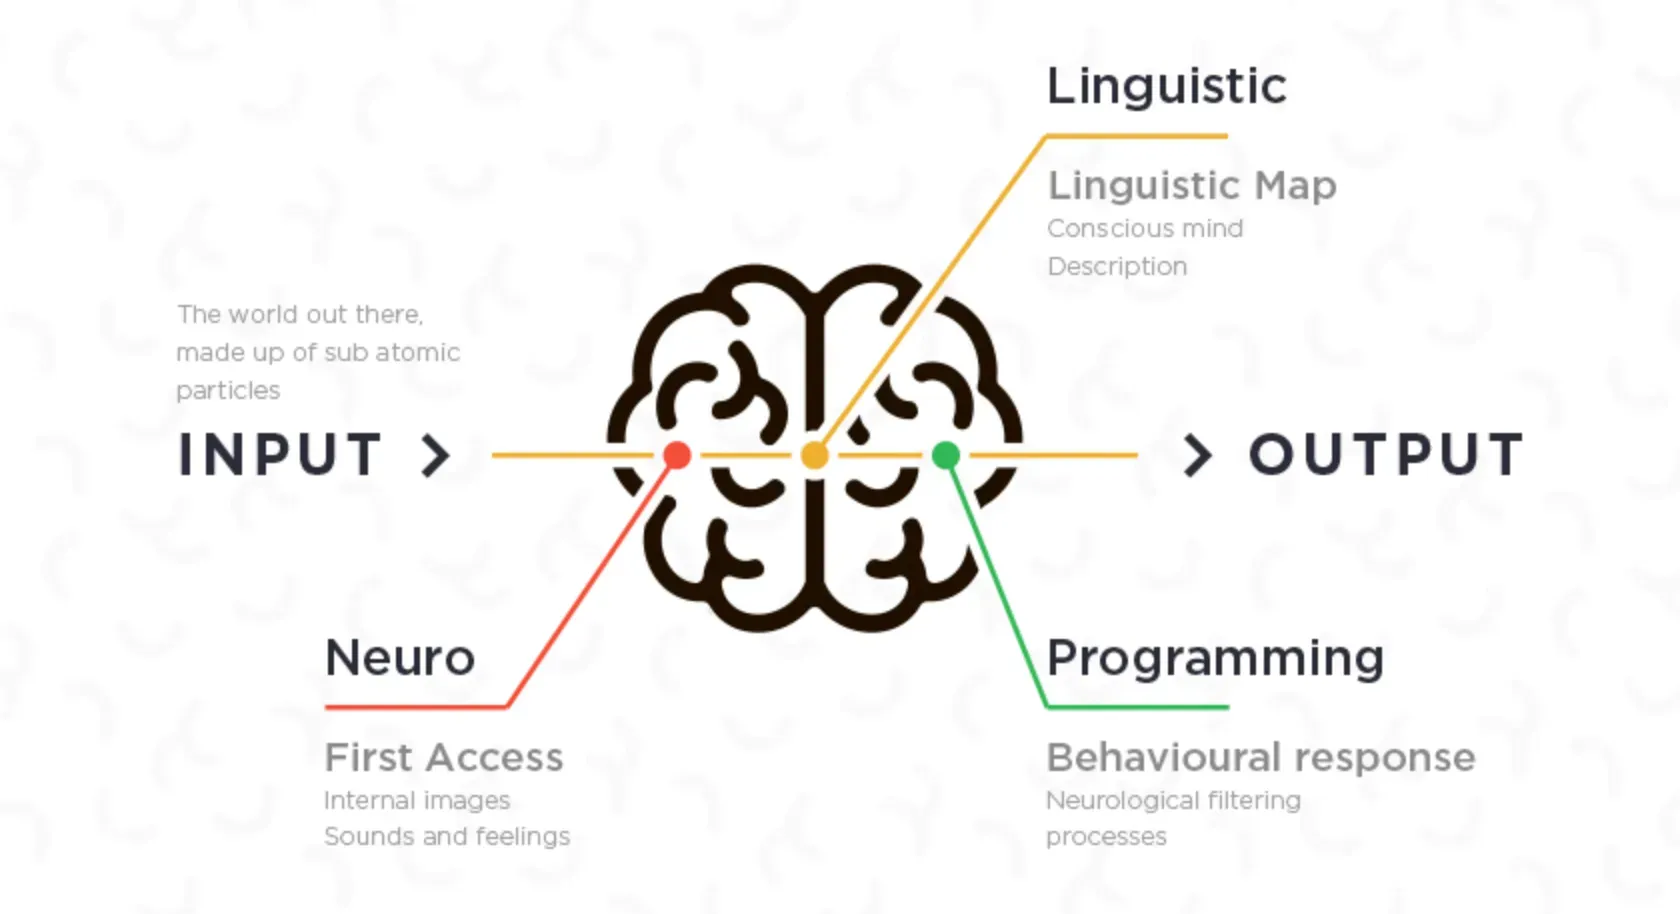 How to use Neuro-Linguistic Programming?